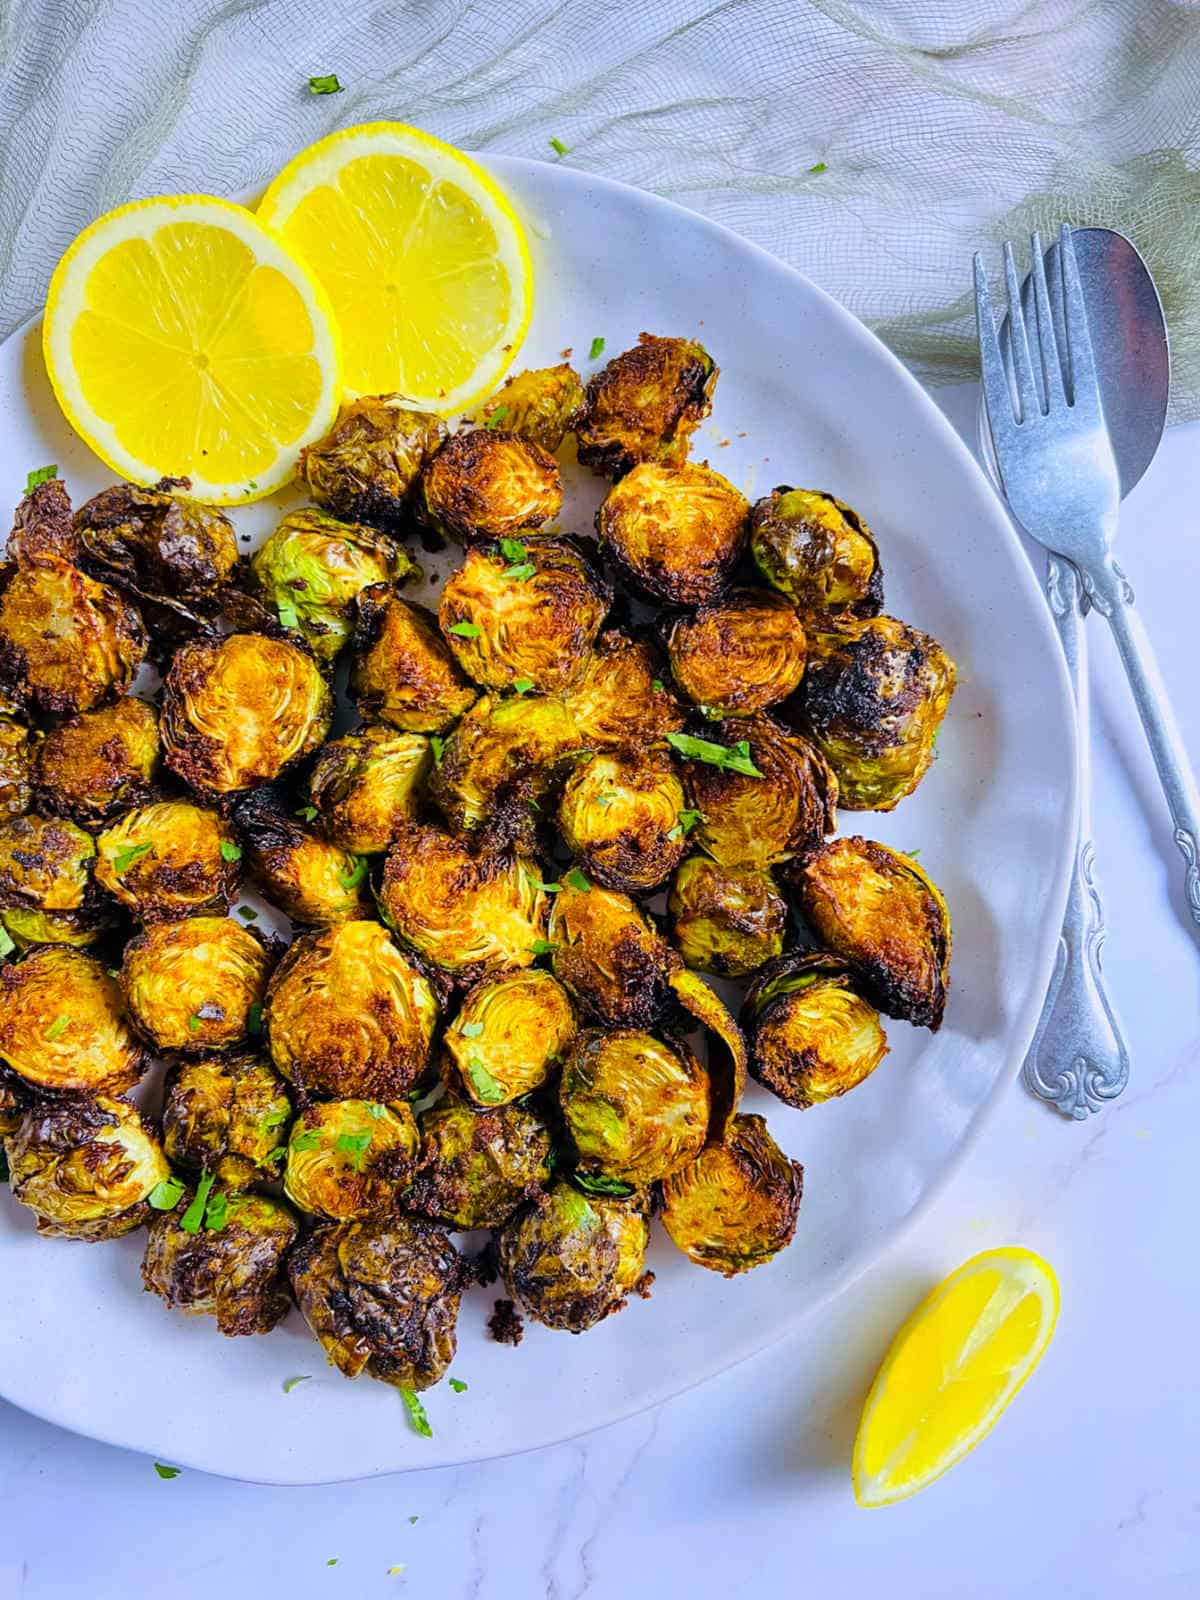 Air fryer brussels sprouts served with lemon on a white plate.